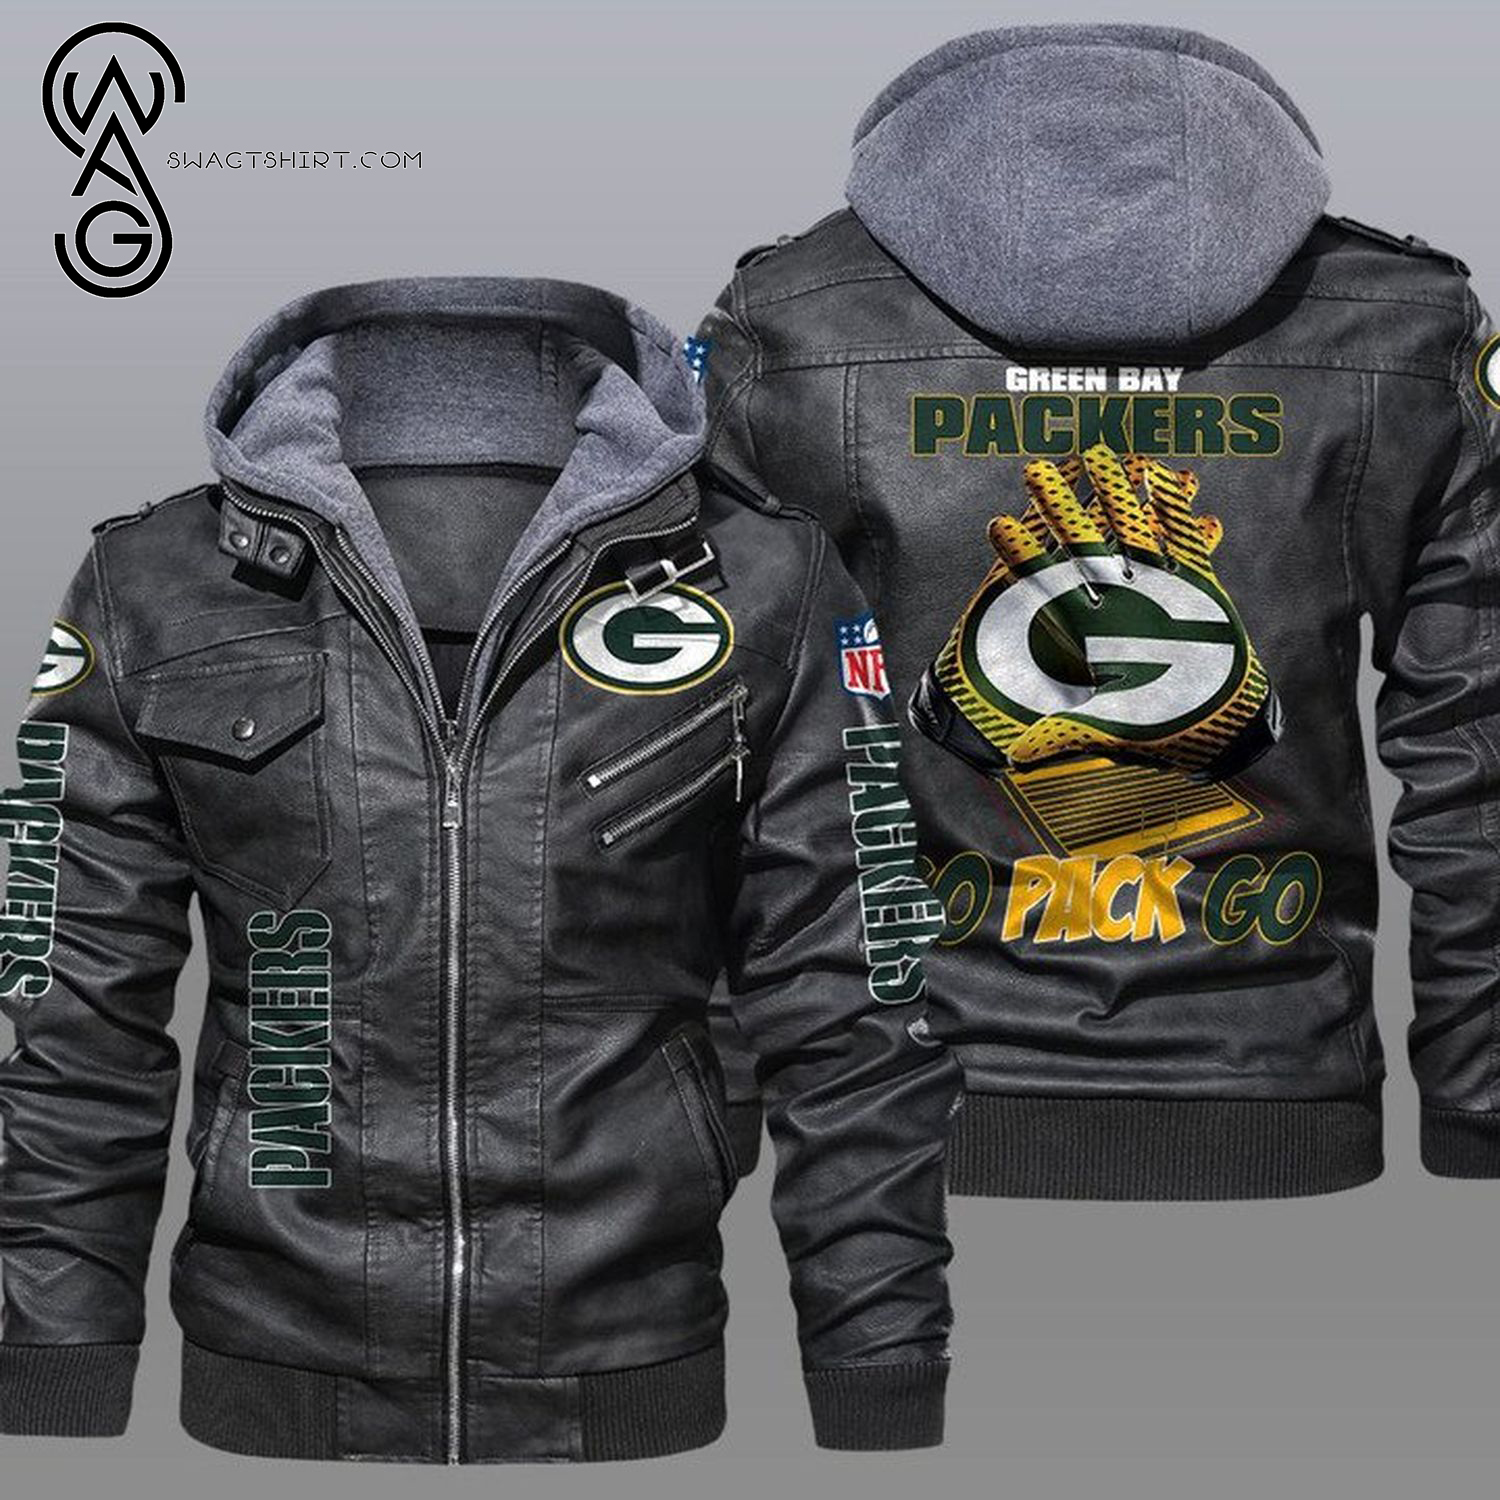 National Football League Green Bay Packers Leather Jacket